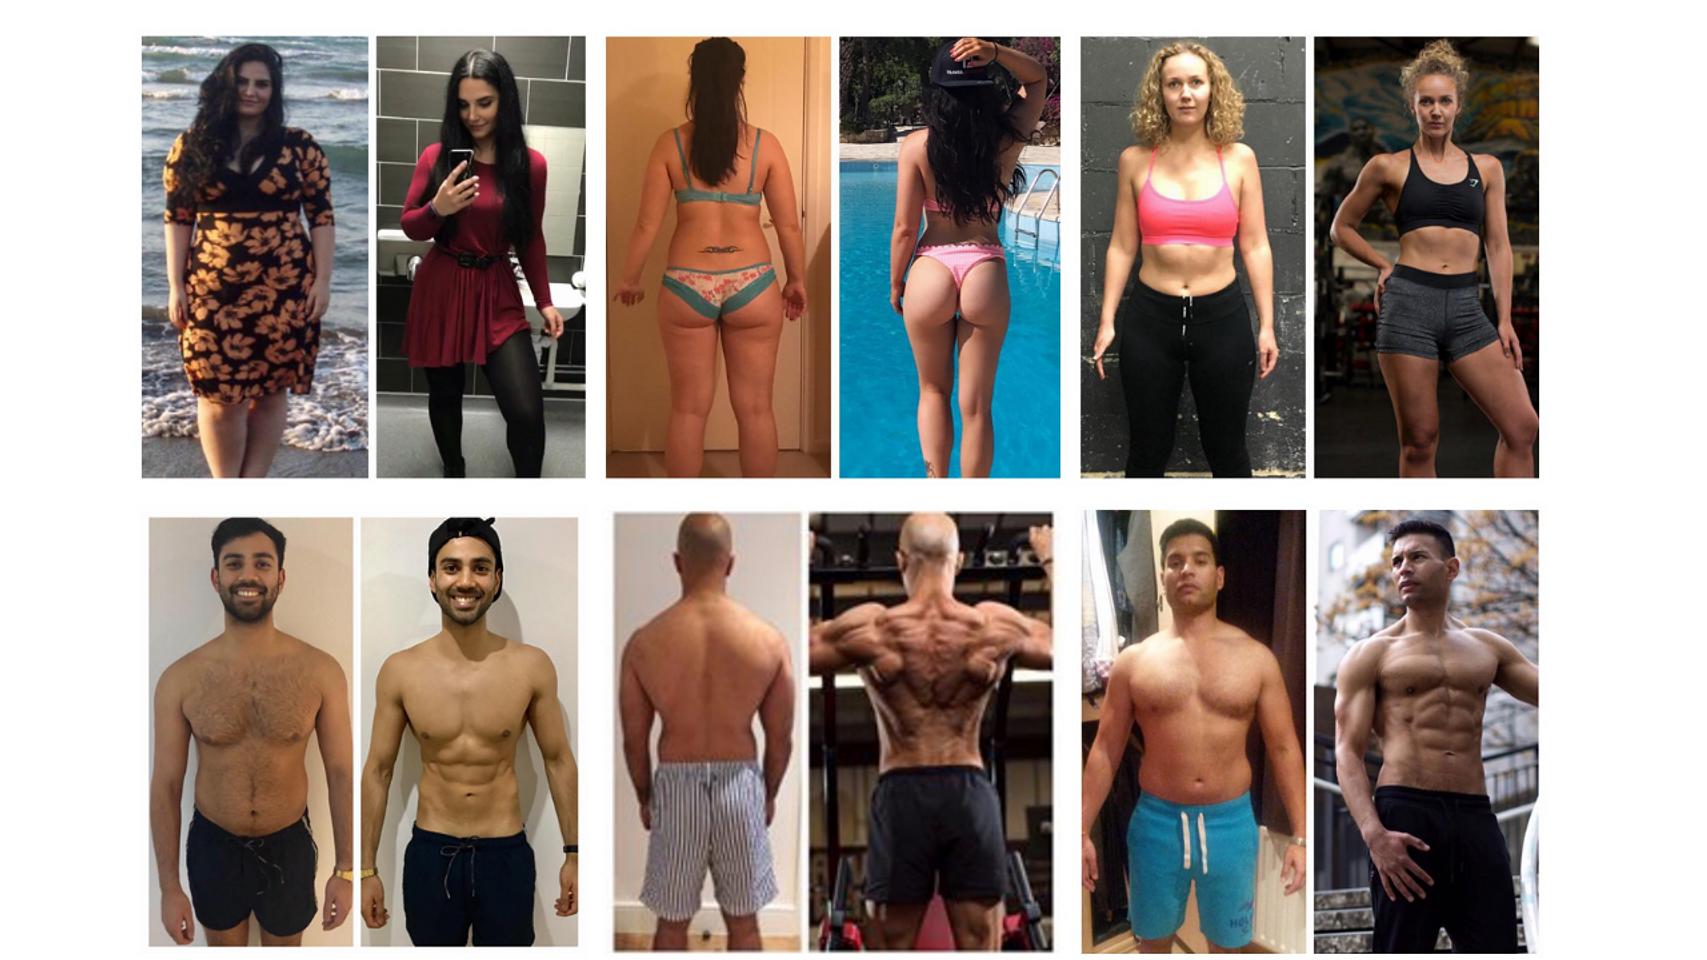 Top 10 Body Transformation Tips From RNT’s Members